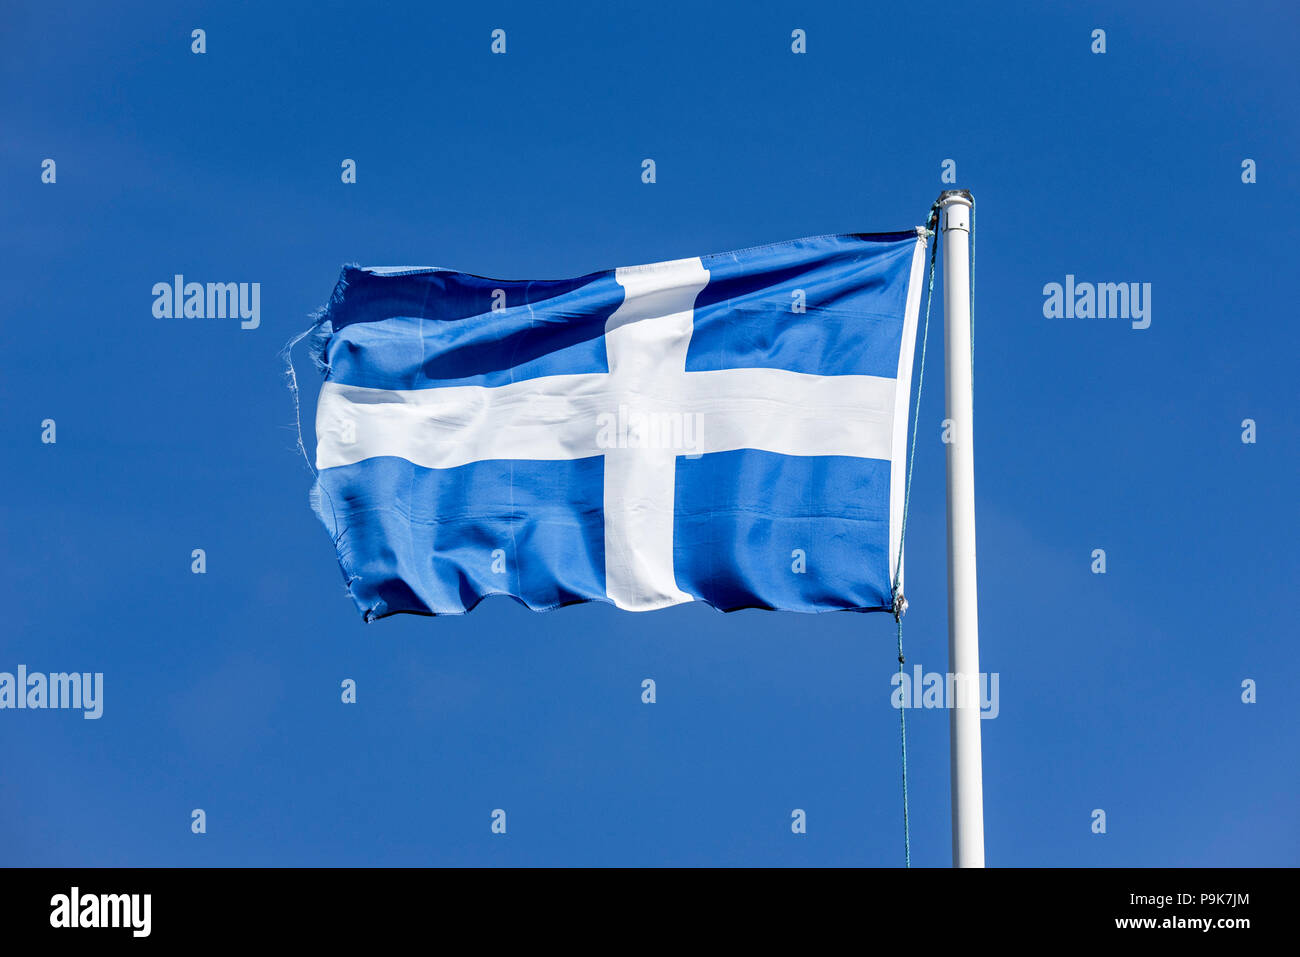 Blue flag with white cross stock photography images - Alamy